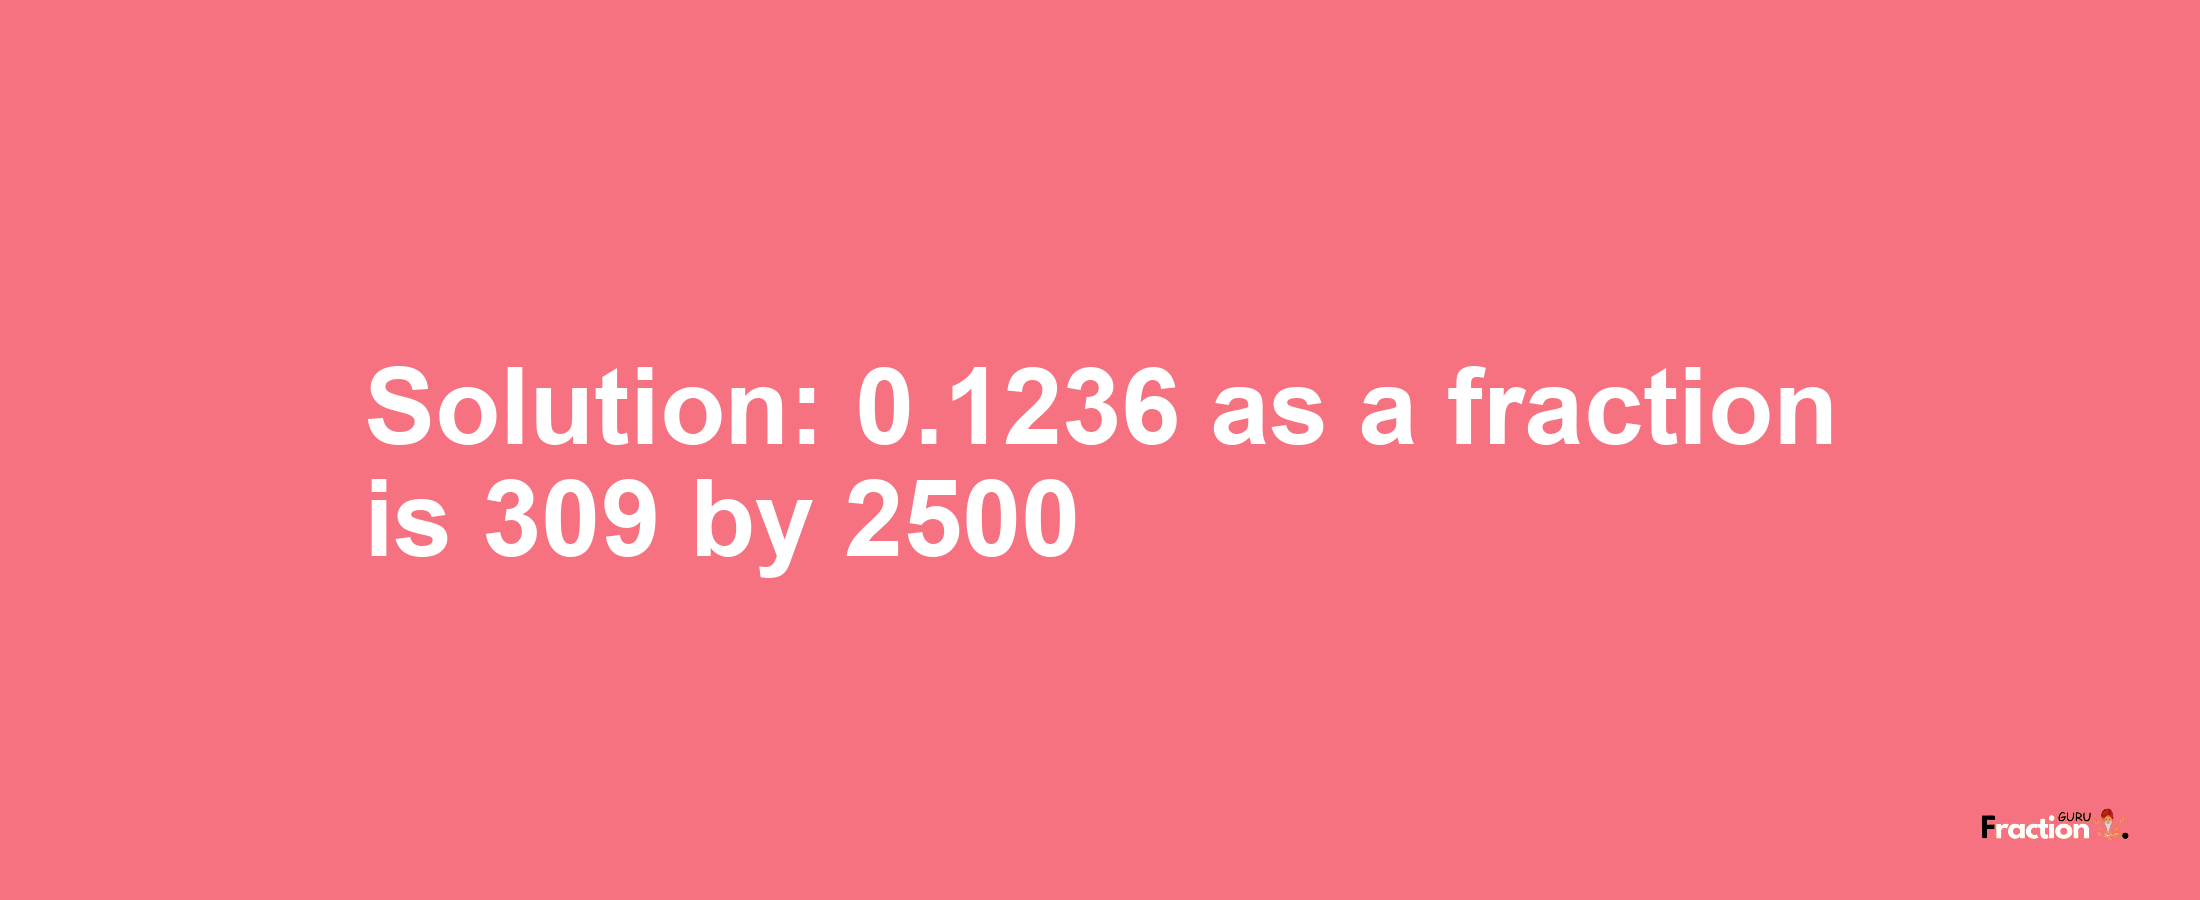 Solution:0.1236 as a fraction is 309/2500